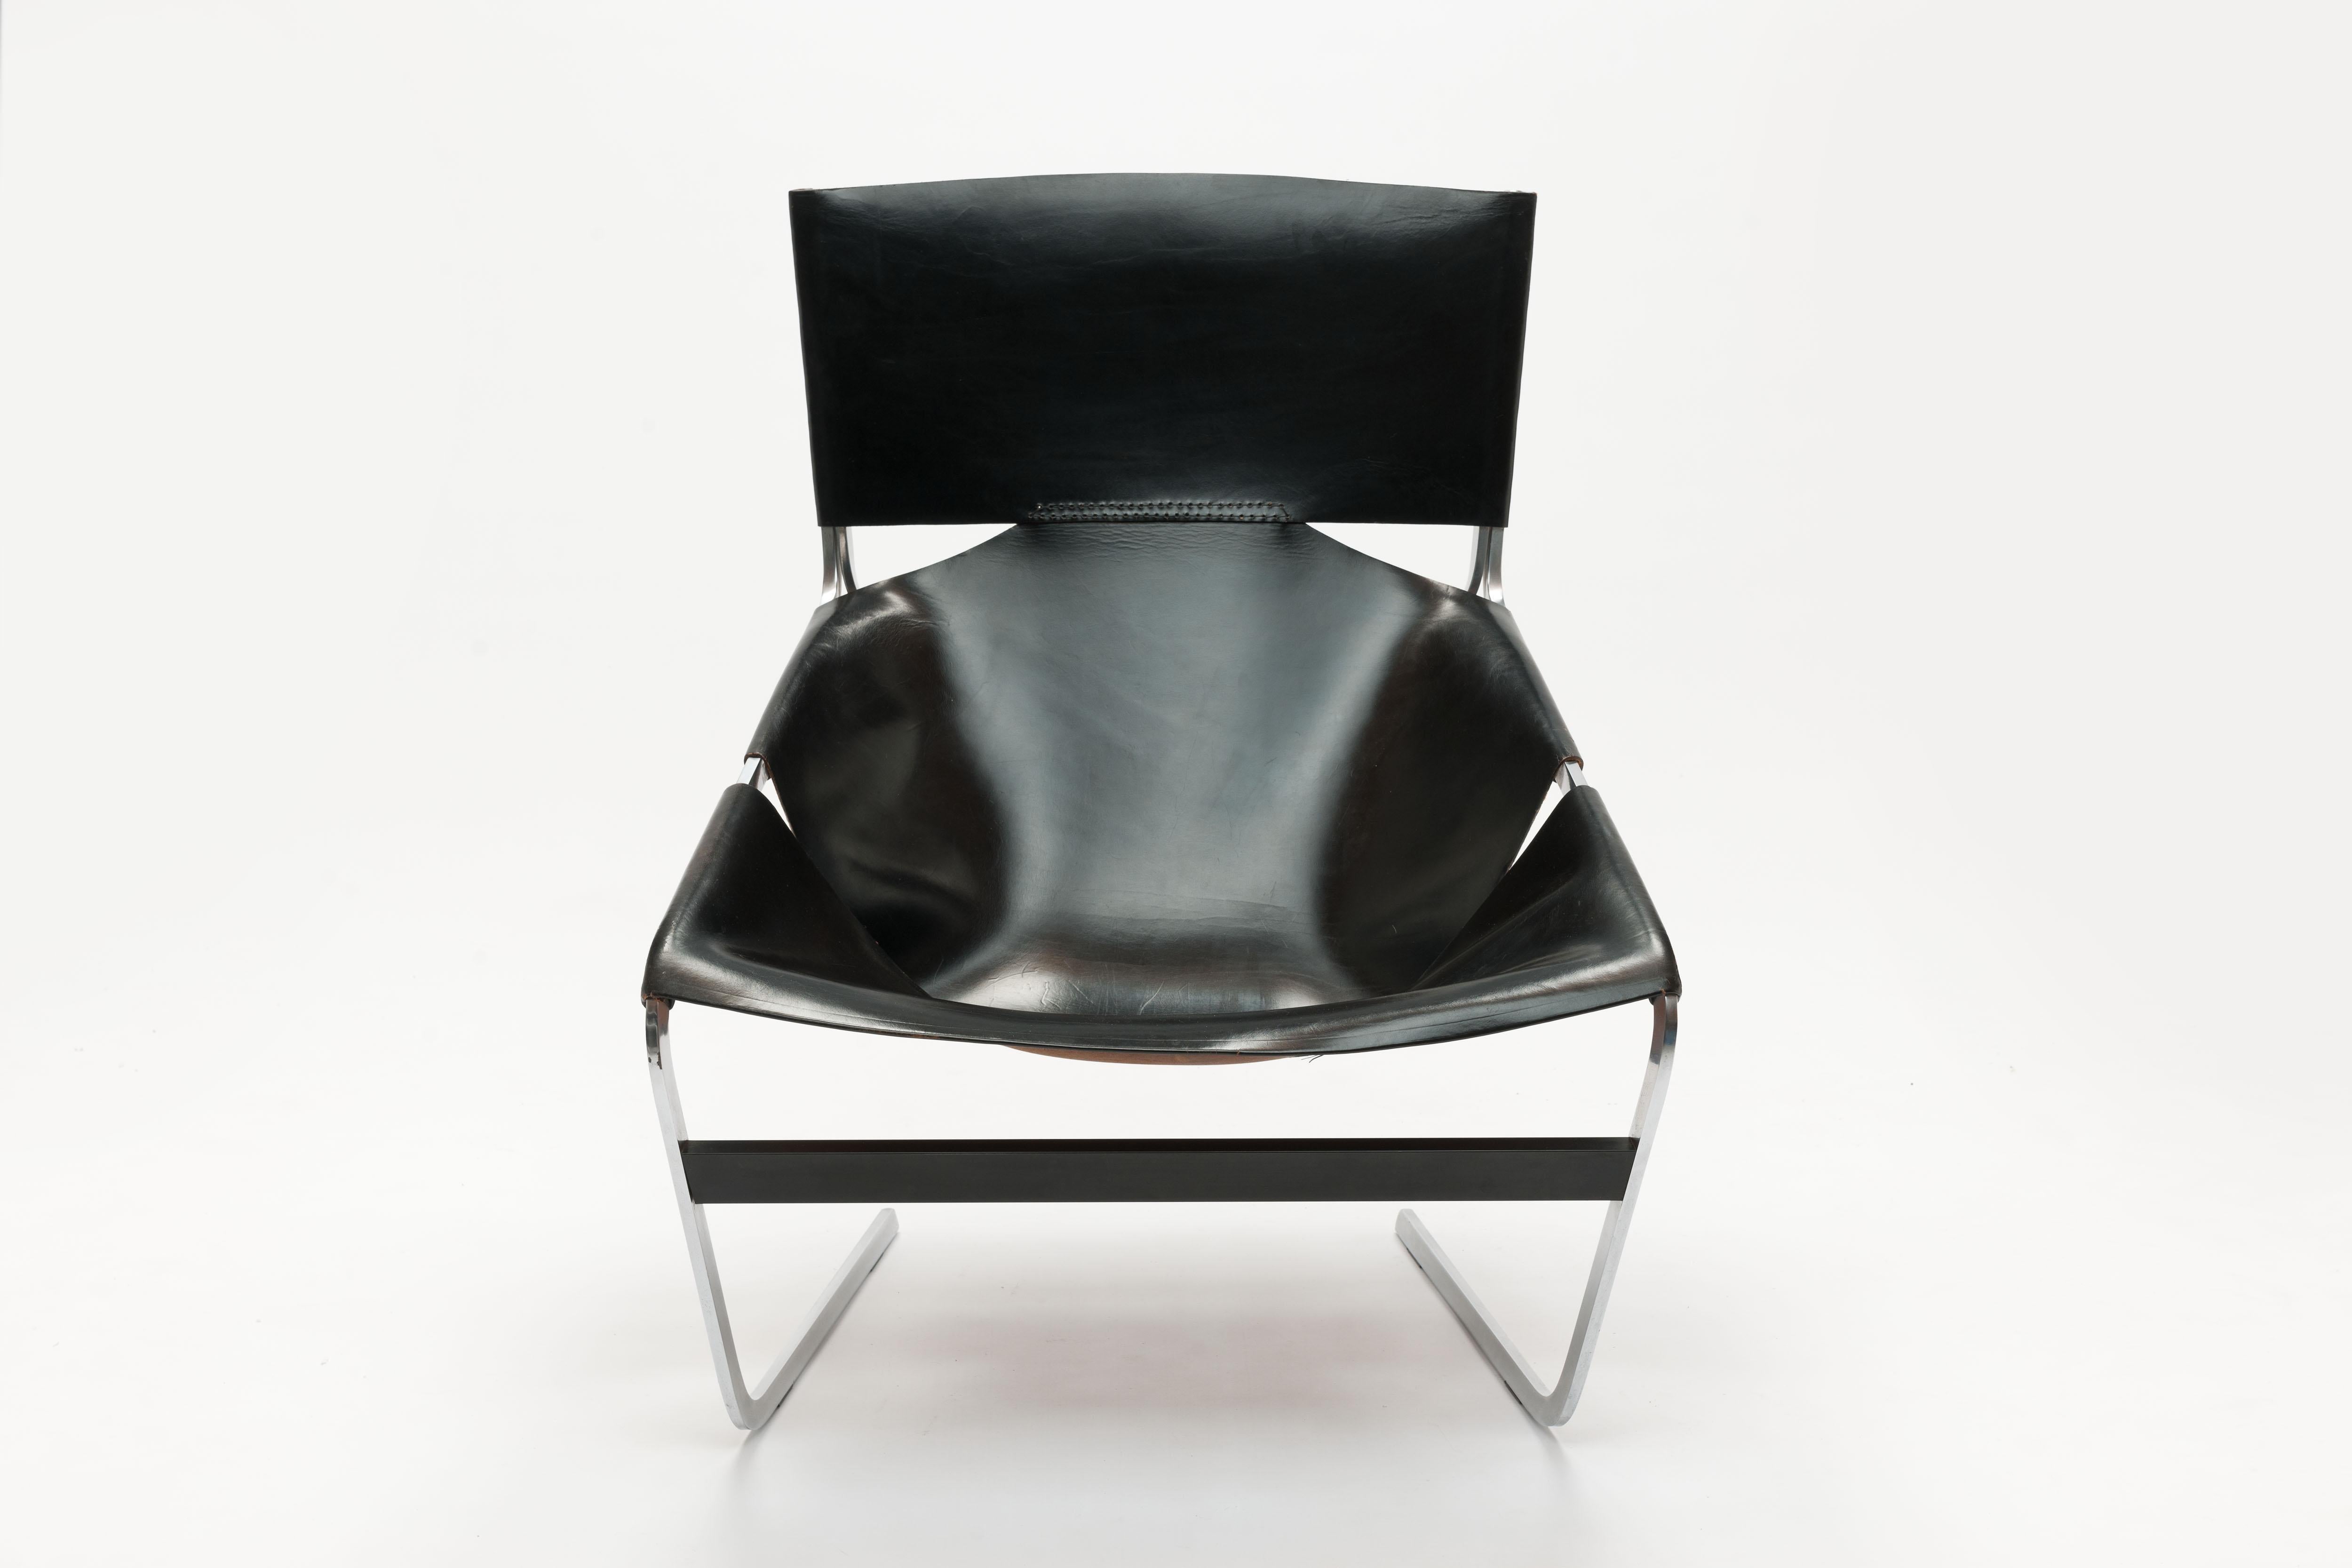 Iconic Pierre Paulin F-444 easy chair in original black saddle leather with cantilevered chrome-plated frame. The chair has an angled open seat that features a floating seat and is visually exceptionally stunning.
Designed in 1962 by Pierre Paulin